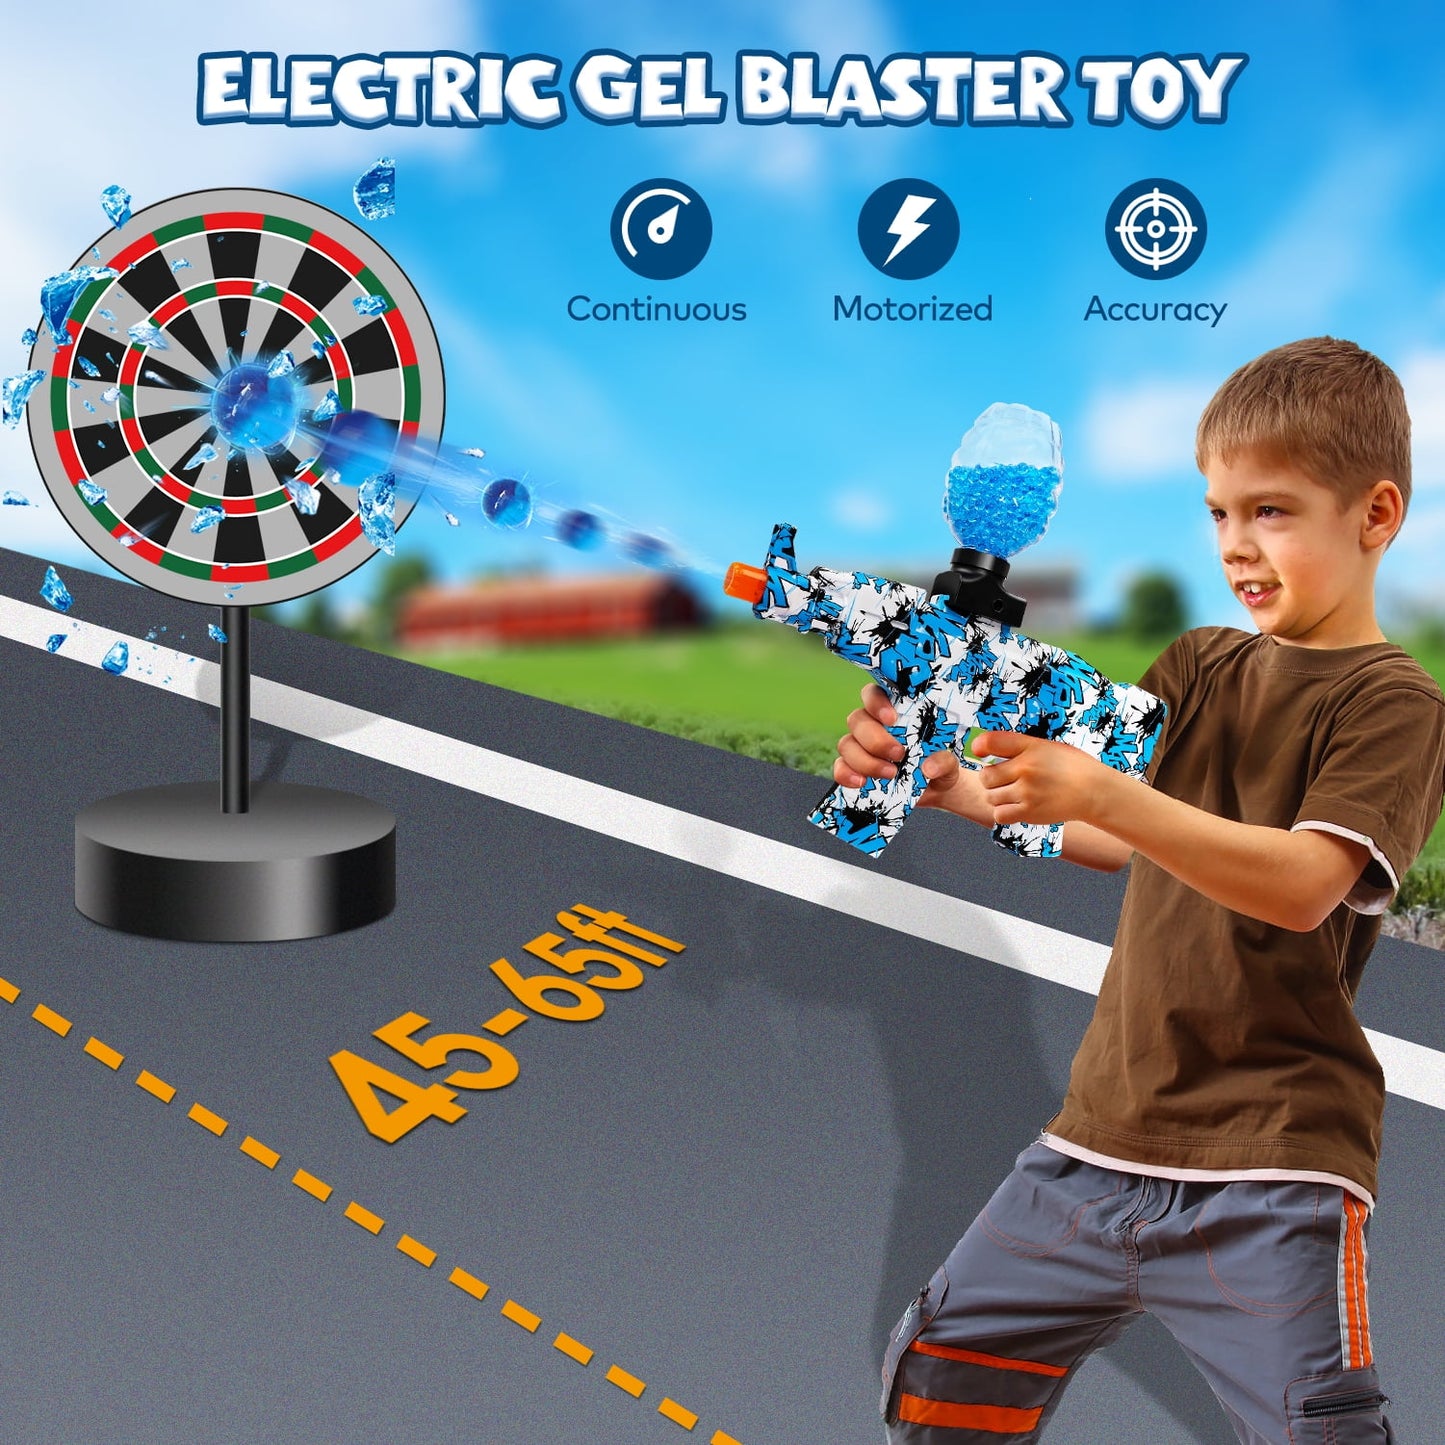 Electric Gel Ball Blaster Toy, Rechargeable Gel Ball Blaster Outdoor Yard Activities Game Ages 8+ Kids and Adults